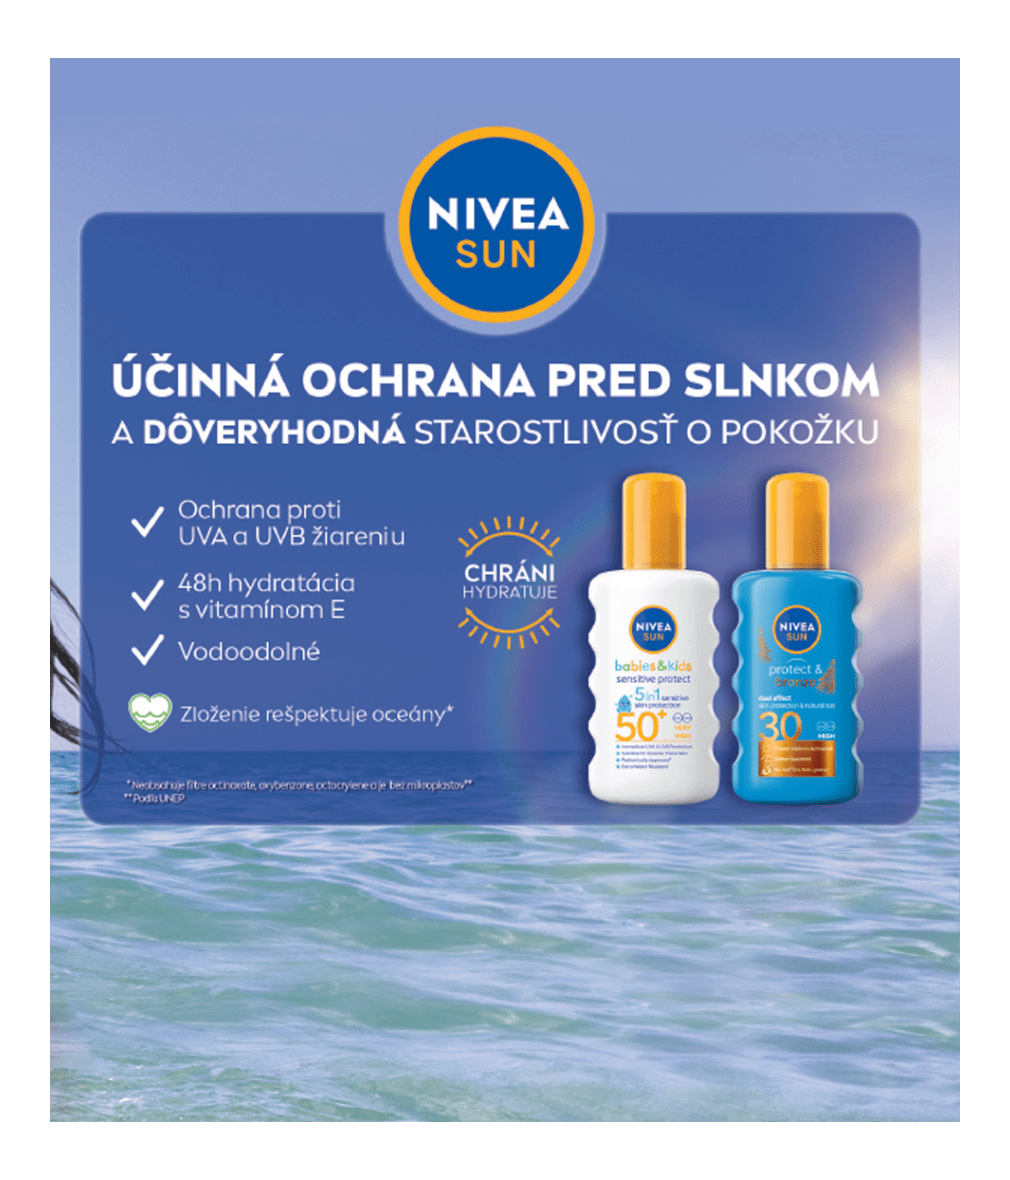 Sun care products